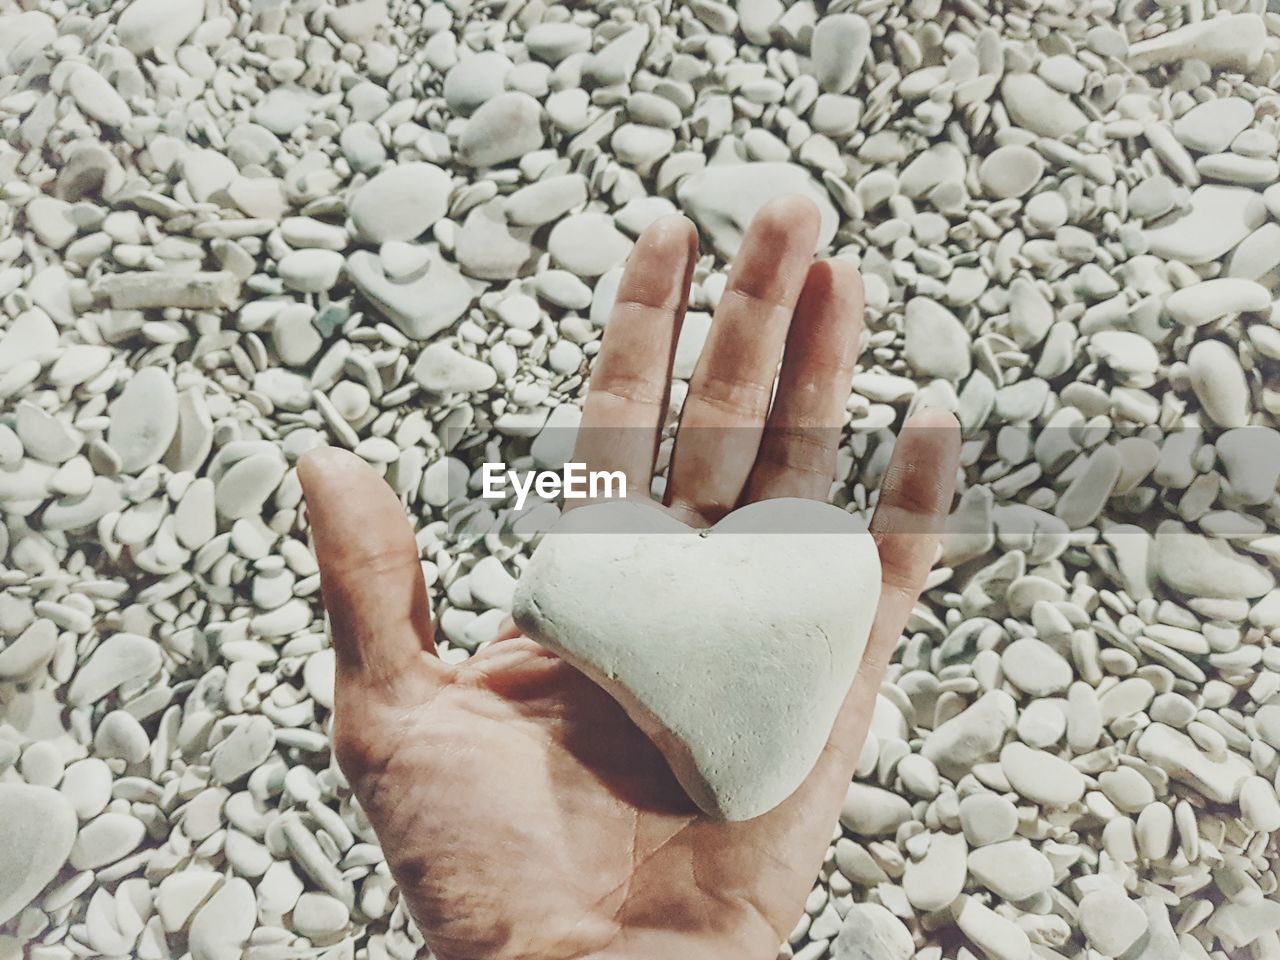 Cropped image of person hand on pebbles